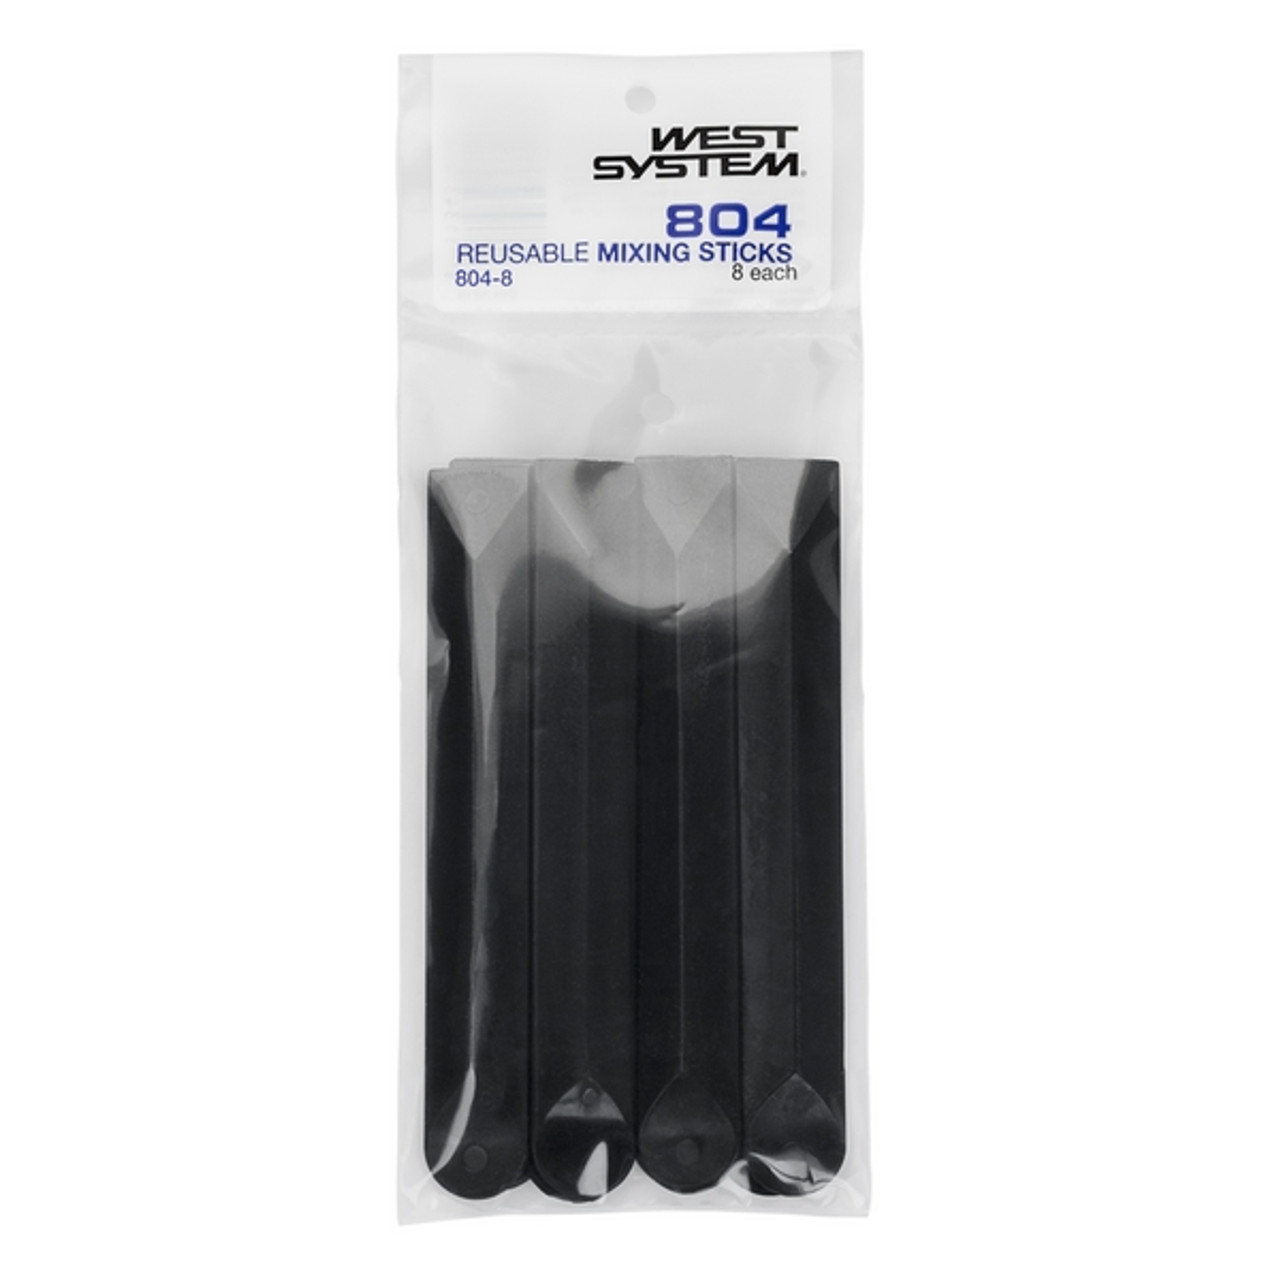 60 Pack West System Reusable Mixing Sticks (804-60)